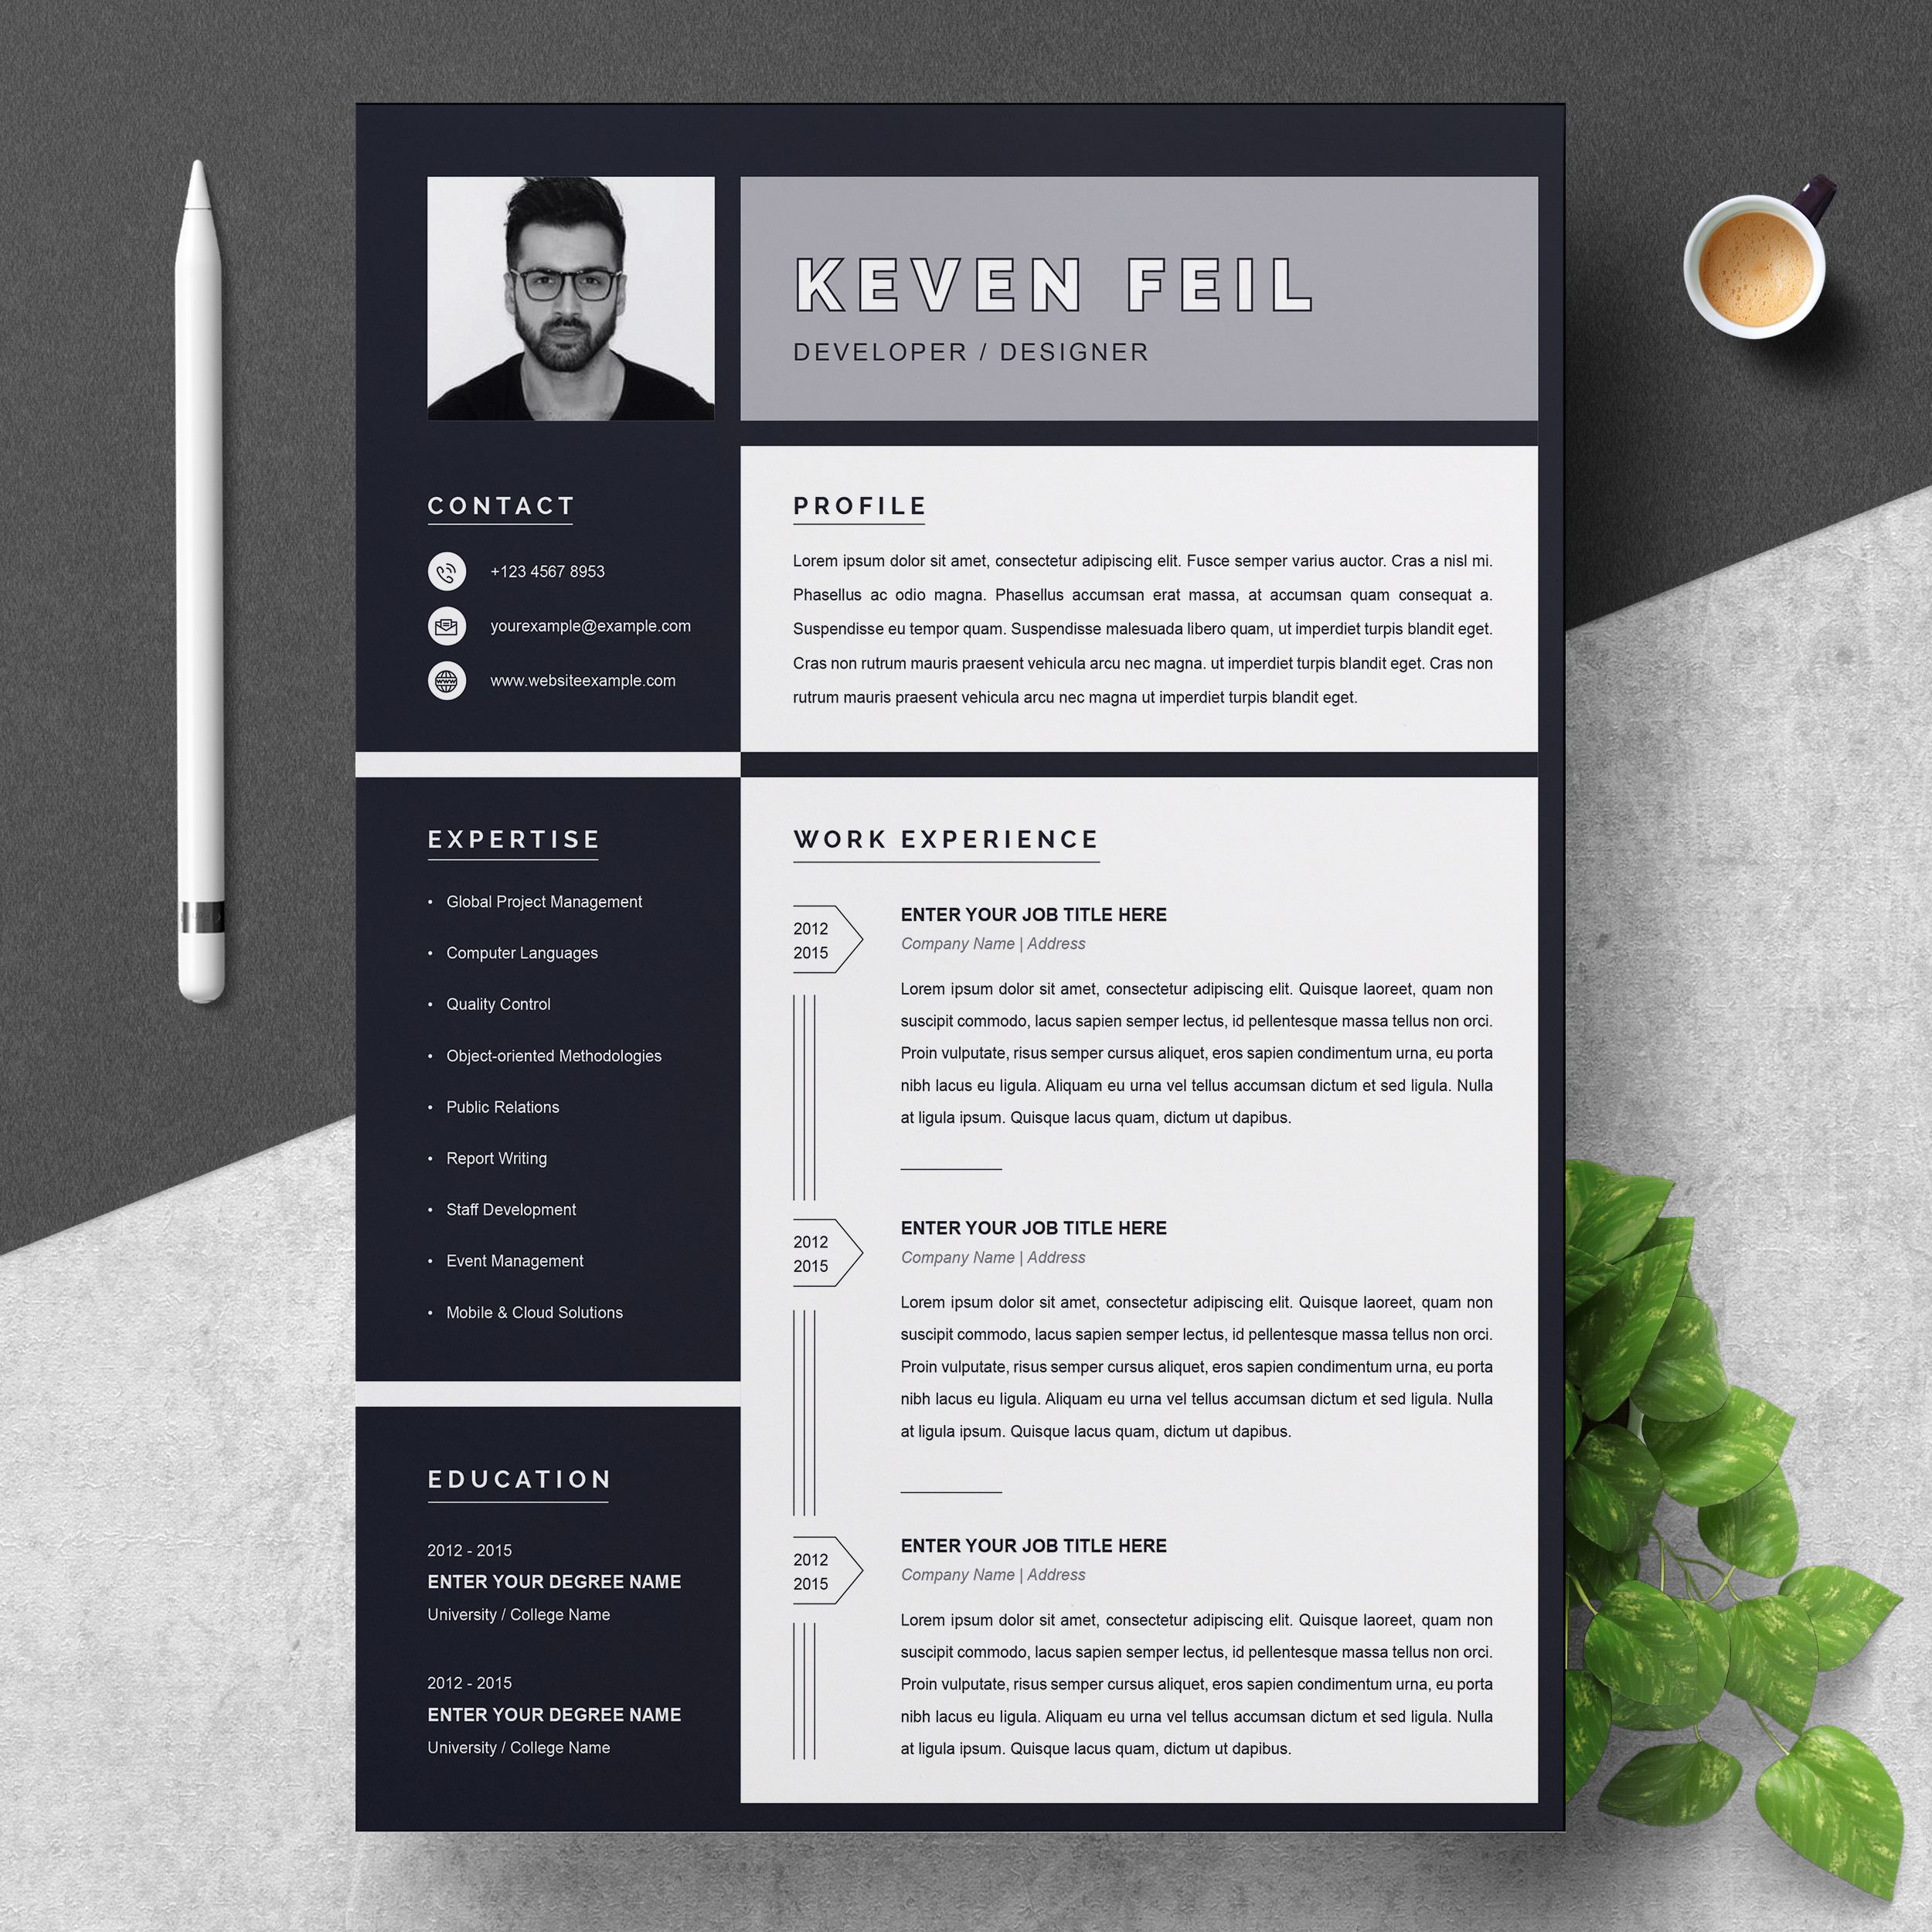 Resume Templates for Freshers Free Download Resume / Cv Template Black & White â Free Resumes, Templates …